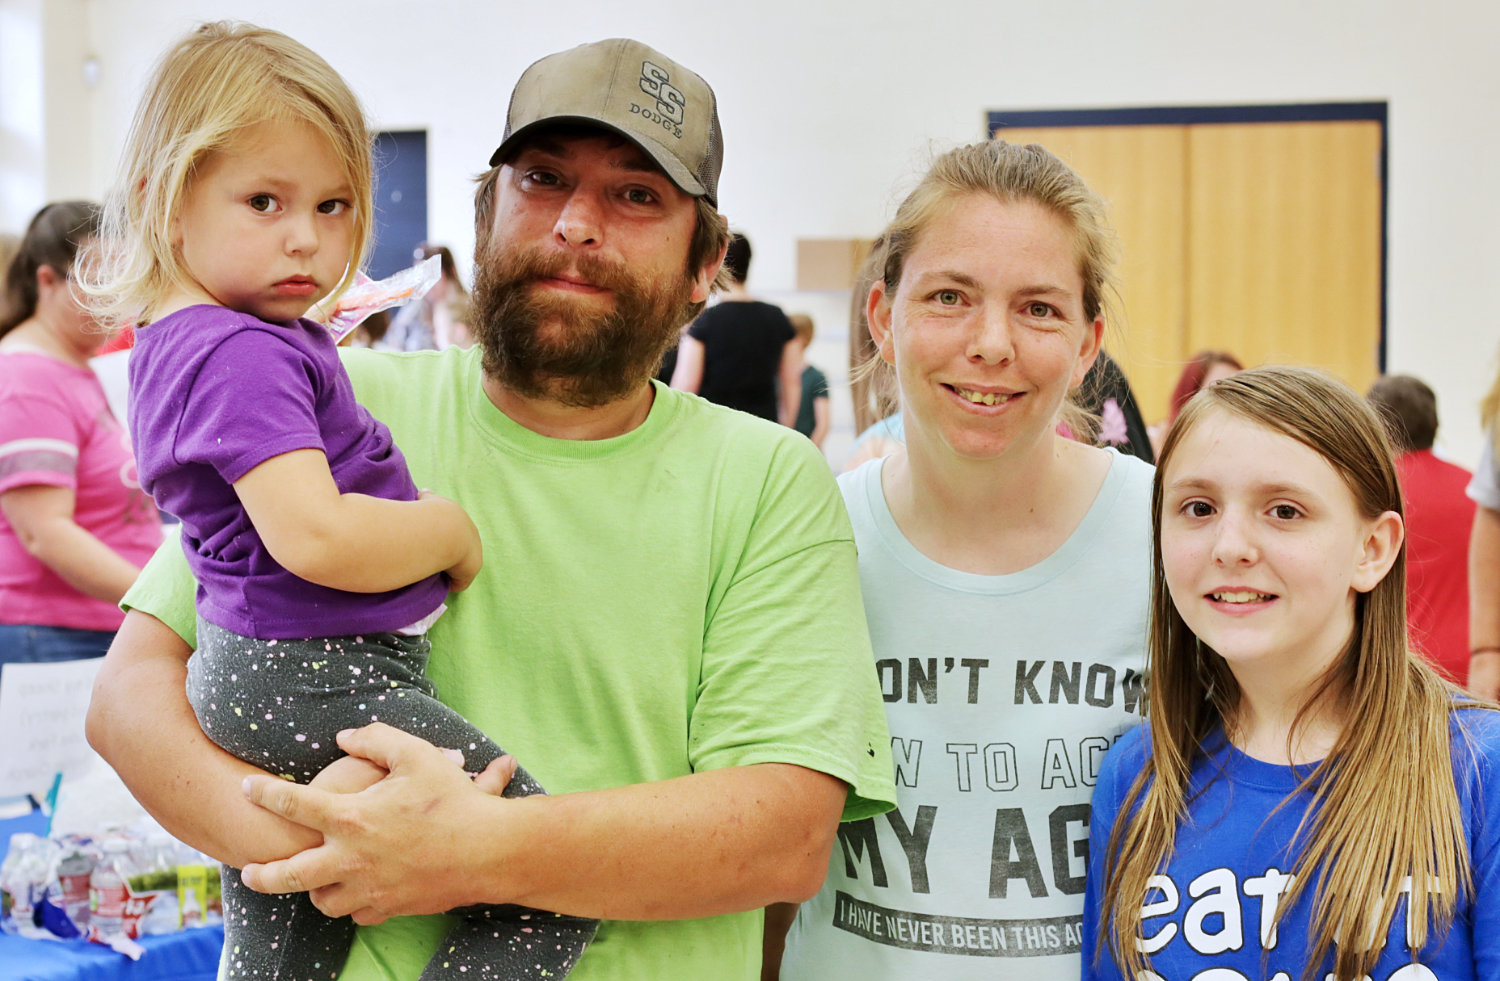 Among those visiting Alba-Golden schools last week were Jennifer and Vance Sparks, pictured with their daughters Hollie (10) and Leeann (2).